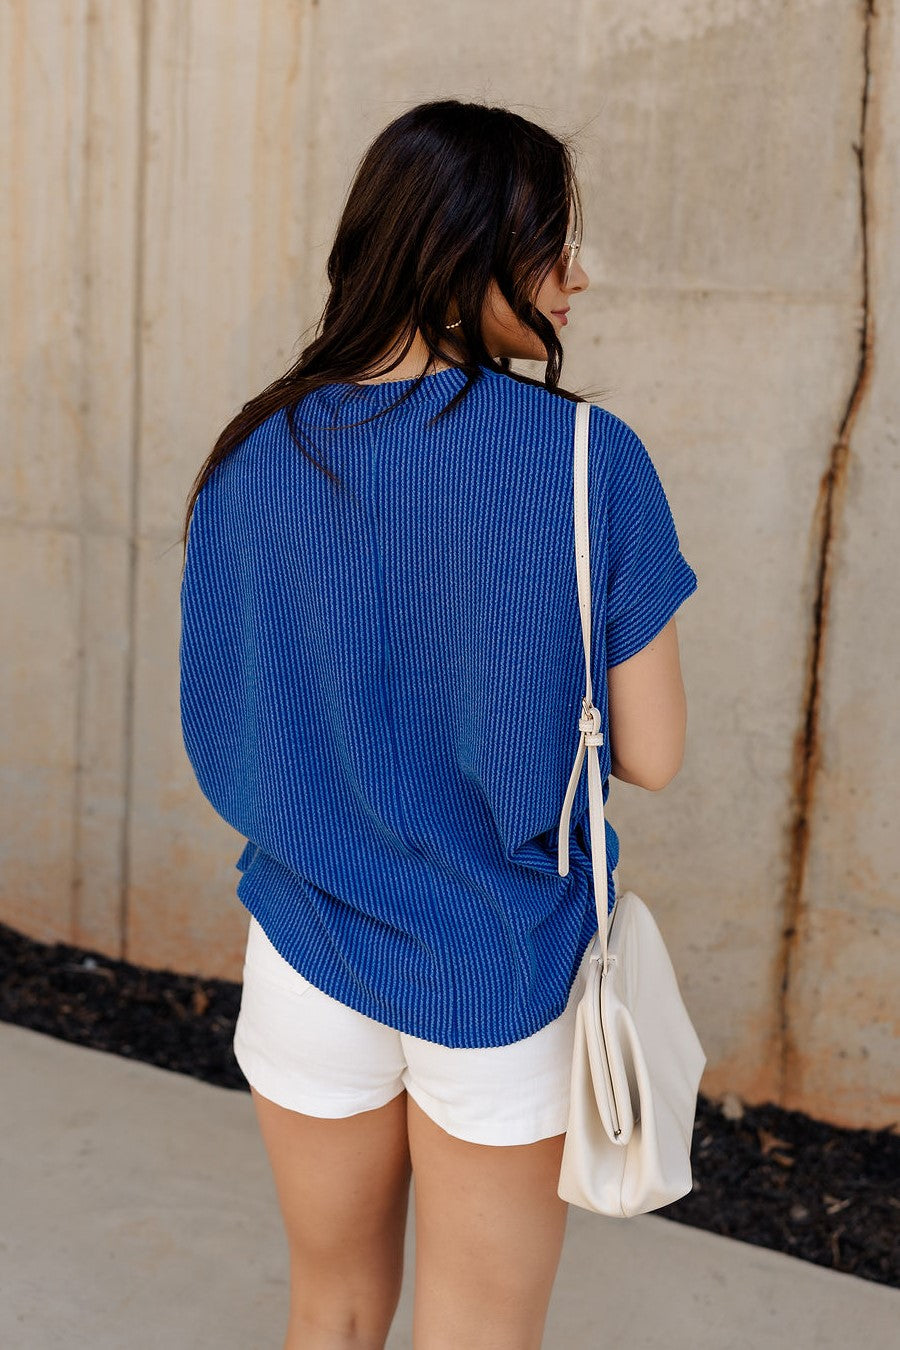 Back view of model wearing the Everly Blue Ribbed Short Sleeve Top that features dark blue and light blue contrast ribbing, a round neckline, and short dolman sleeves with ribbed cuff details.